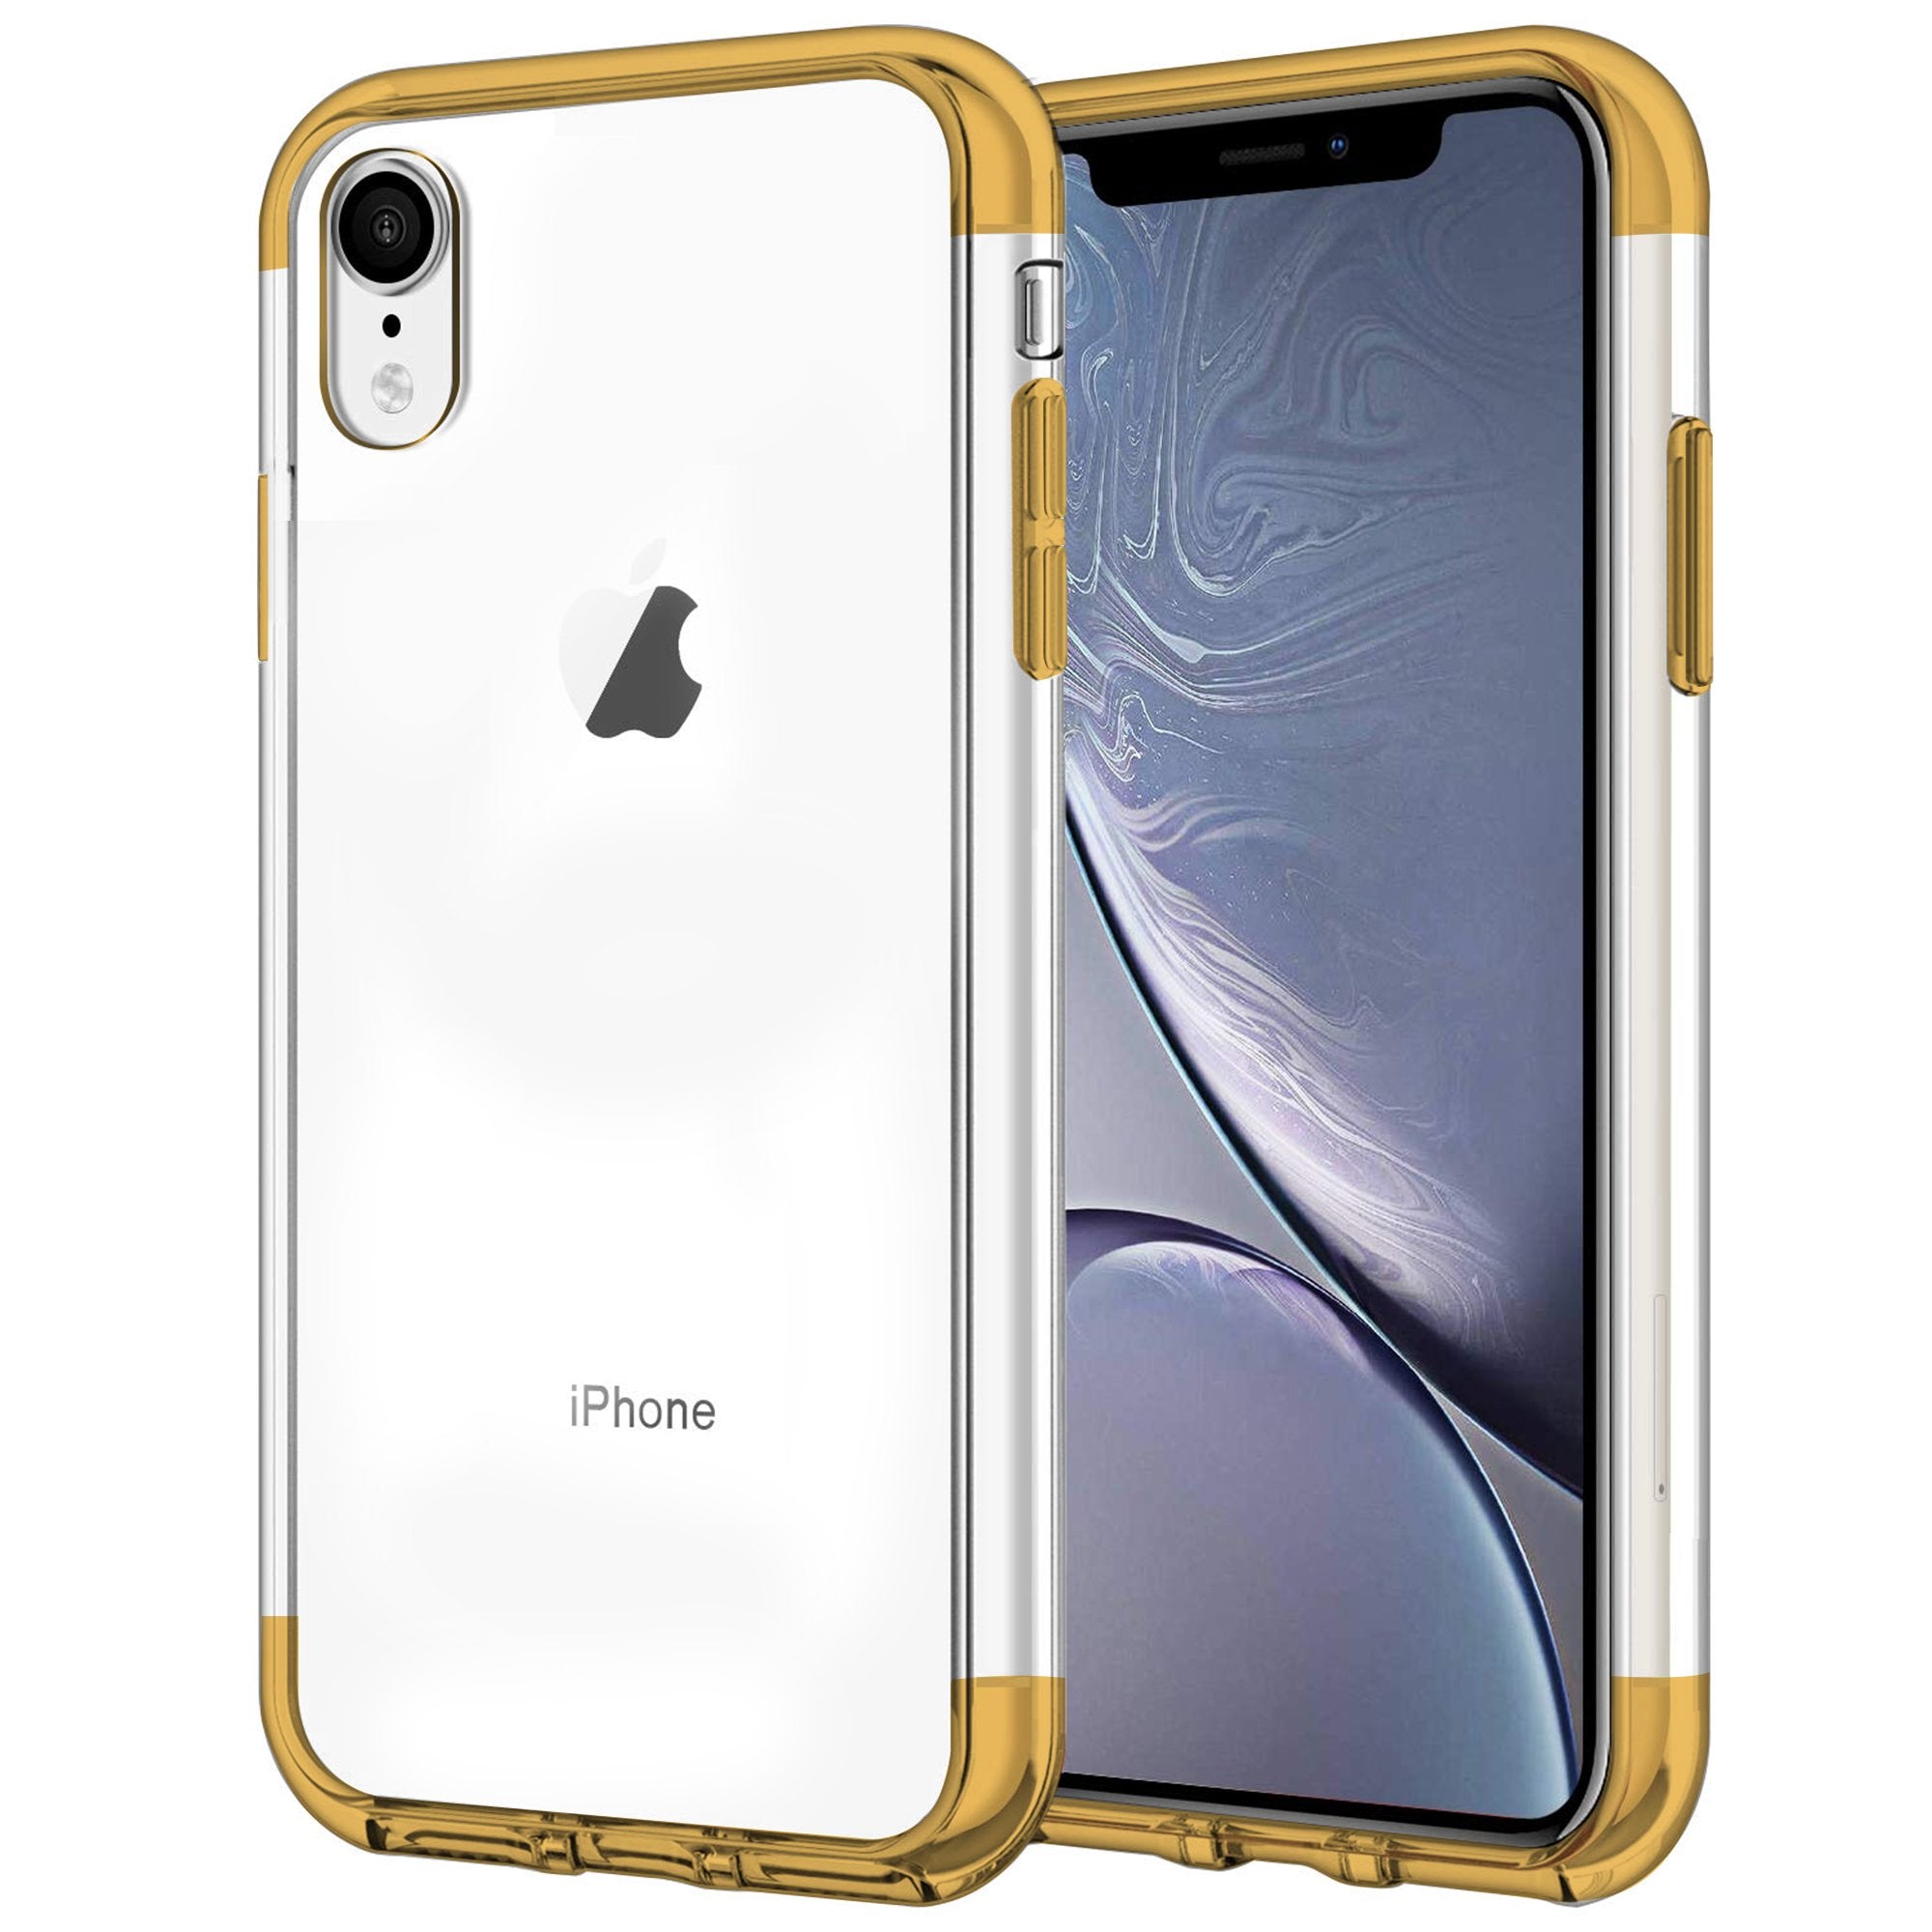 Case for iPhone XR Shock Proof Soft TPU Silicone Phone Clear Slim Cover